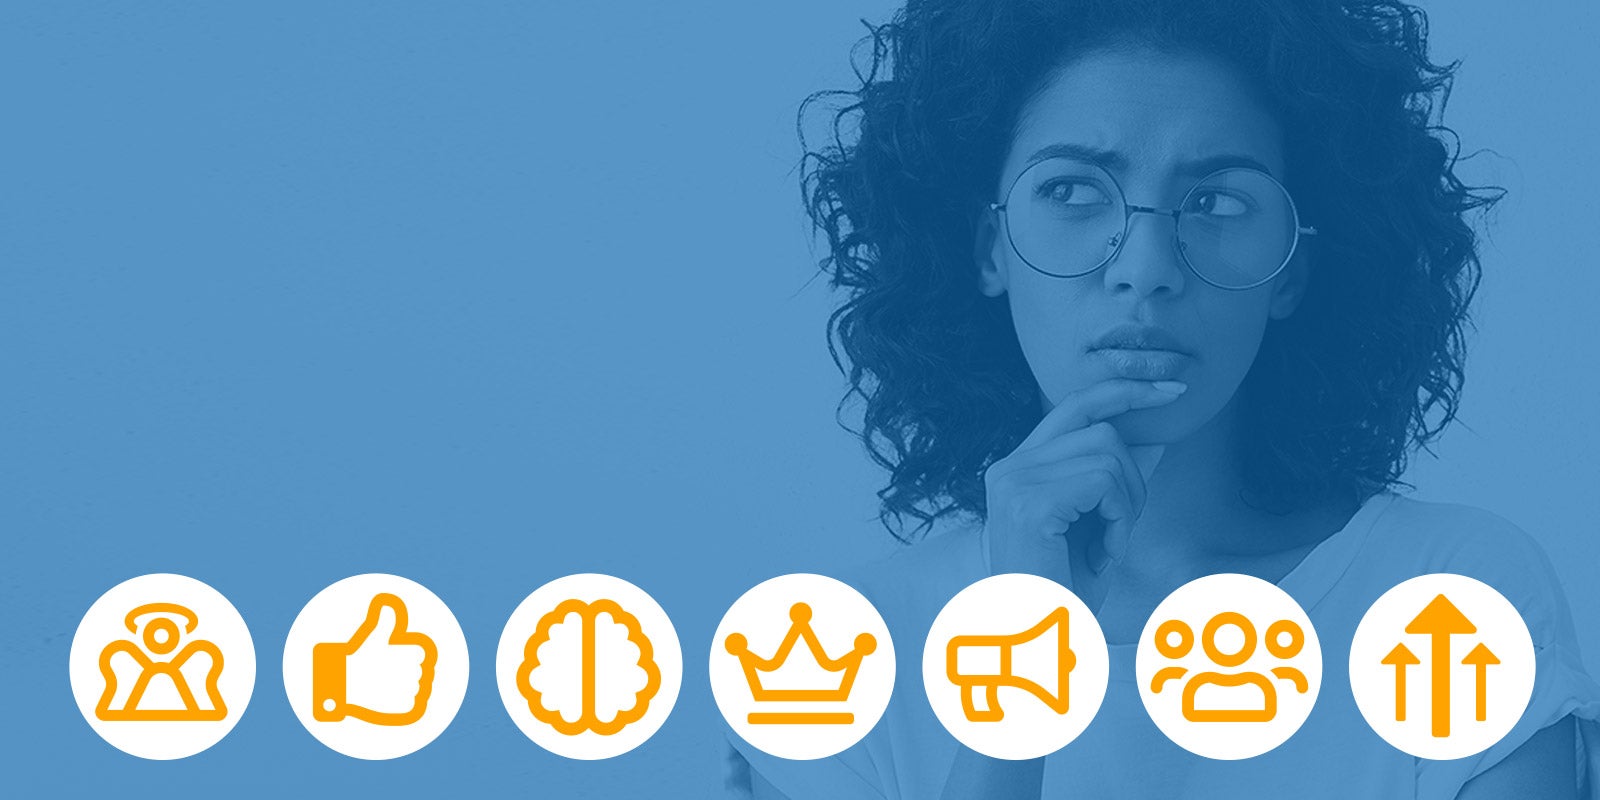 Woman in blue image behind seven icons of Types of unconscious bias